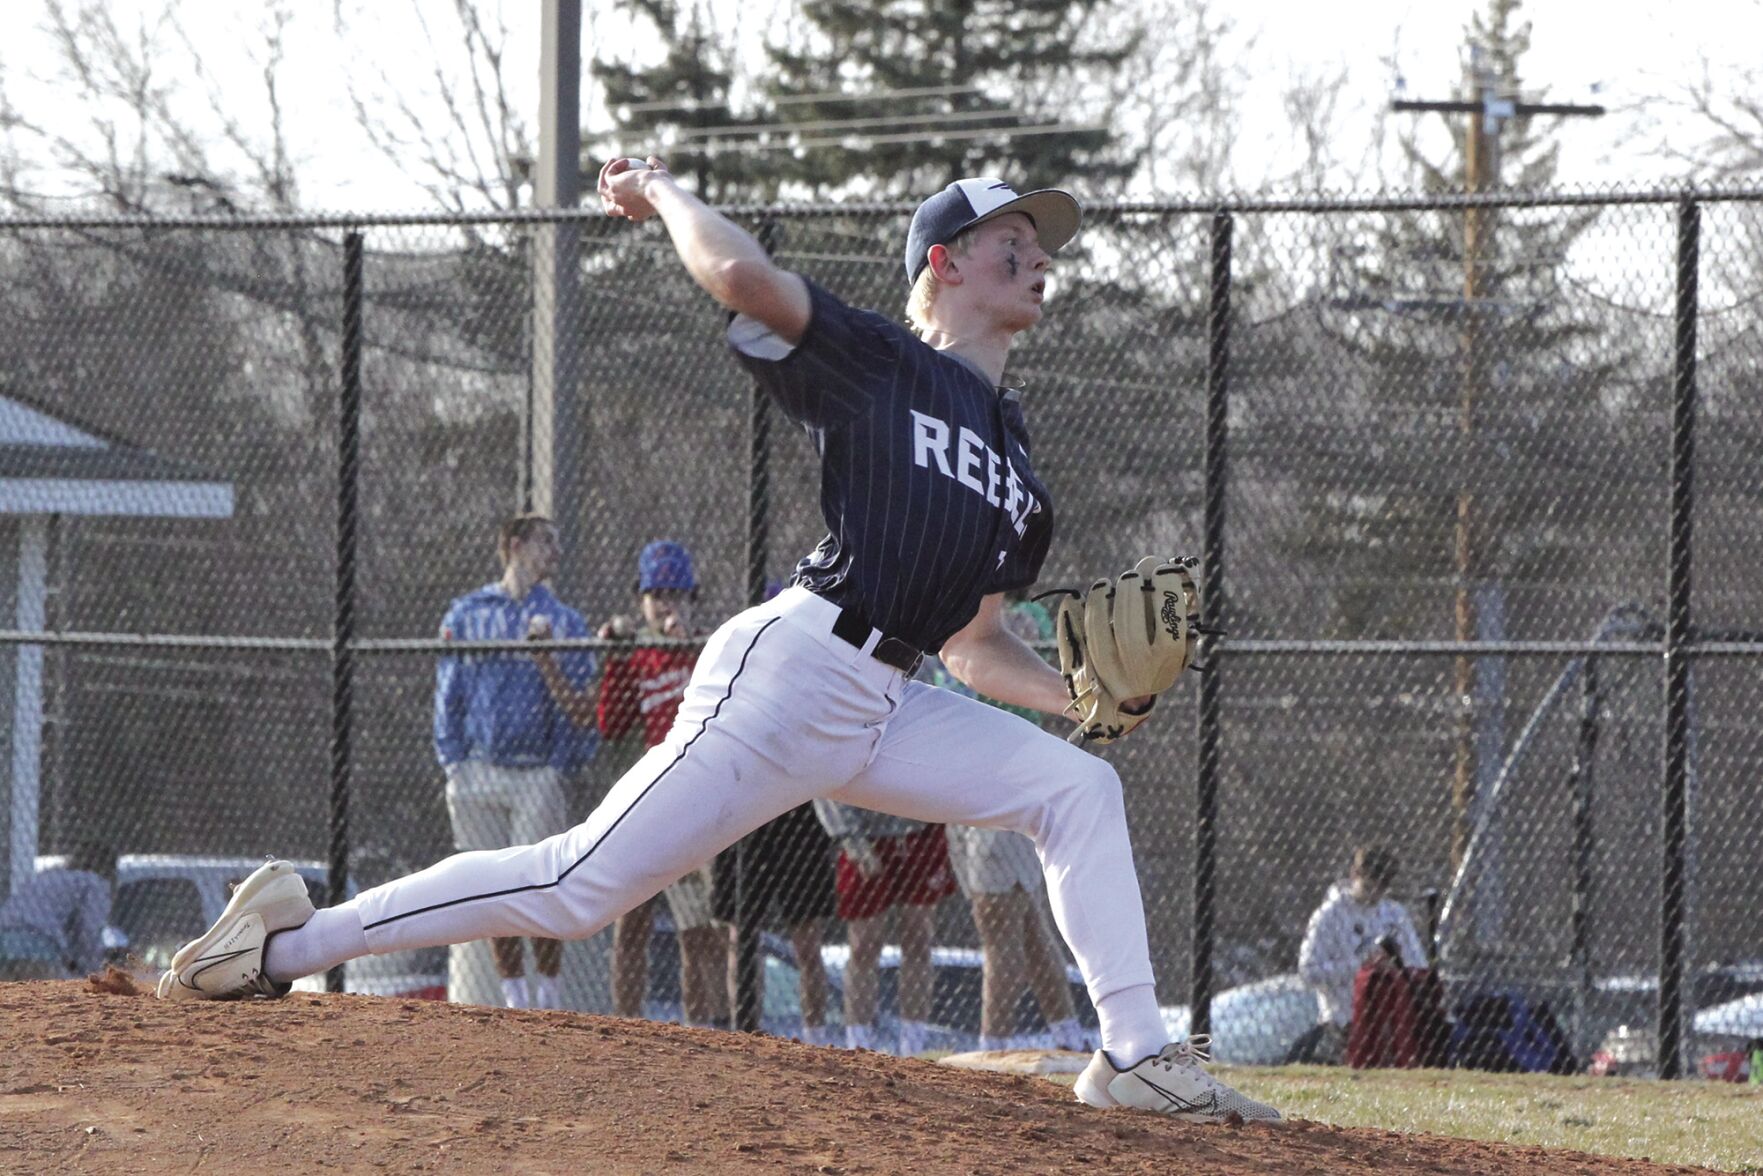 Rebels baseball opens season with two road wins